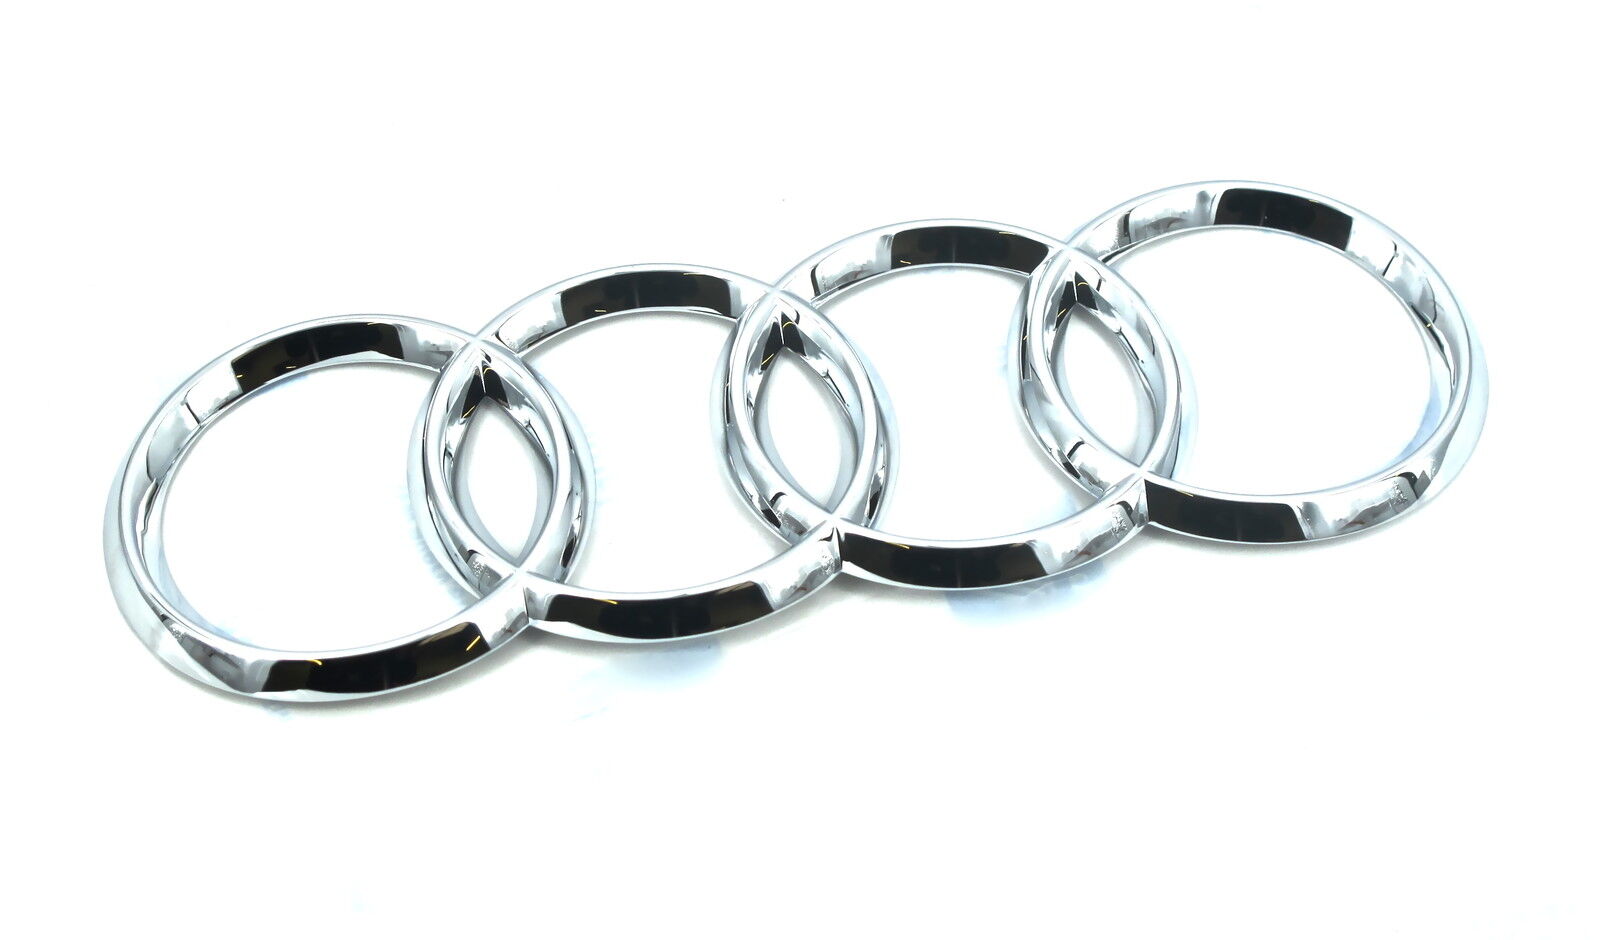 Genuine New AUDI GRILLE BADGE Rings Front Emblem For A5 S5 2008-2011 Quattro TDI